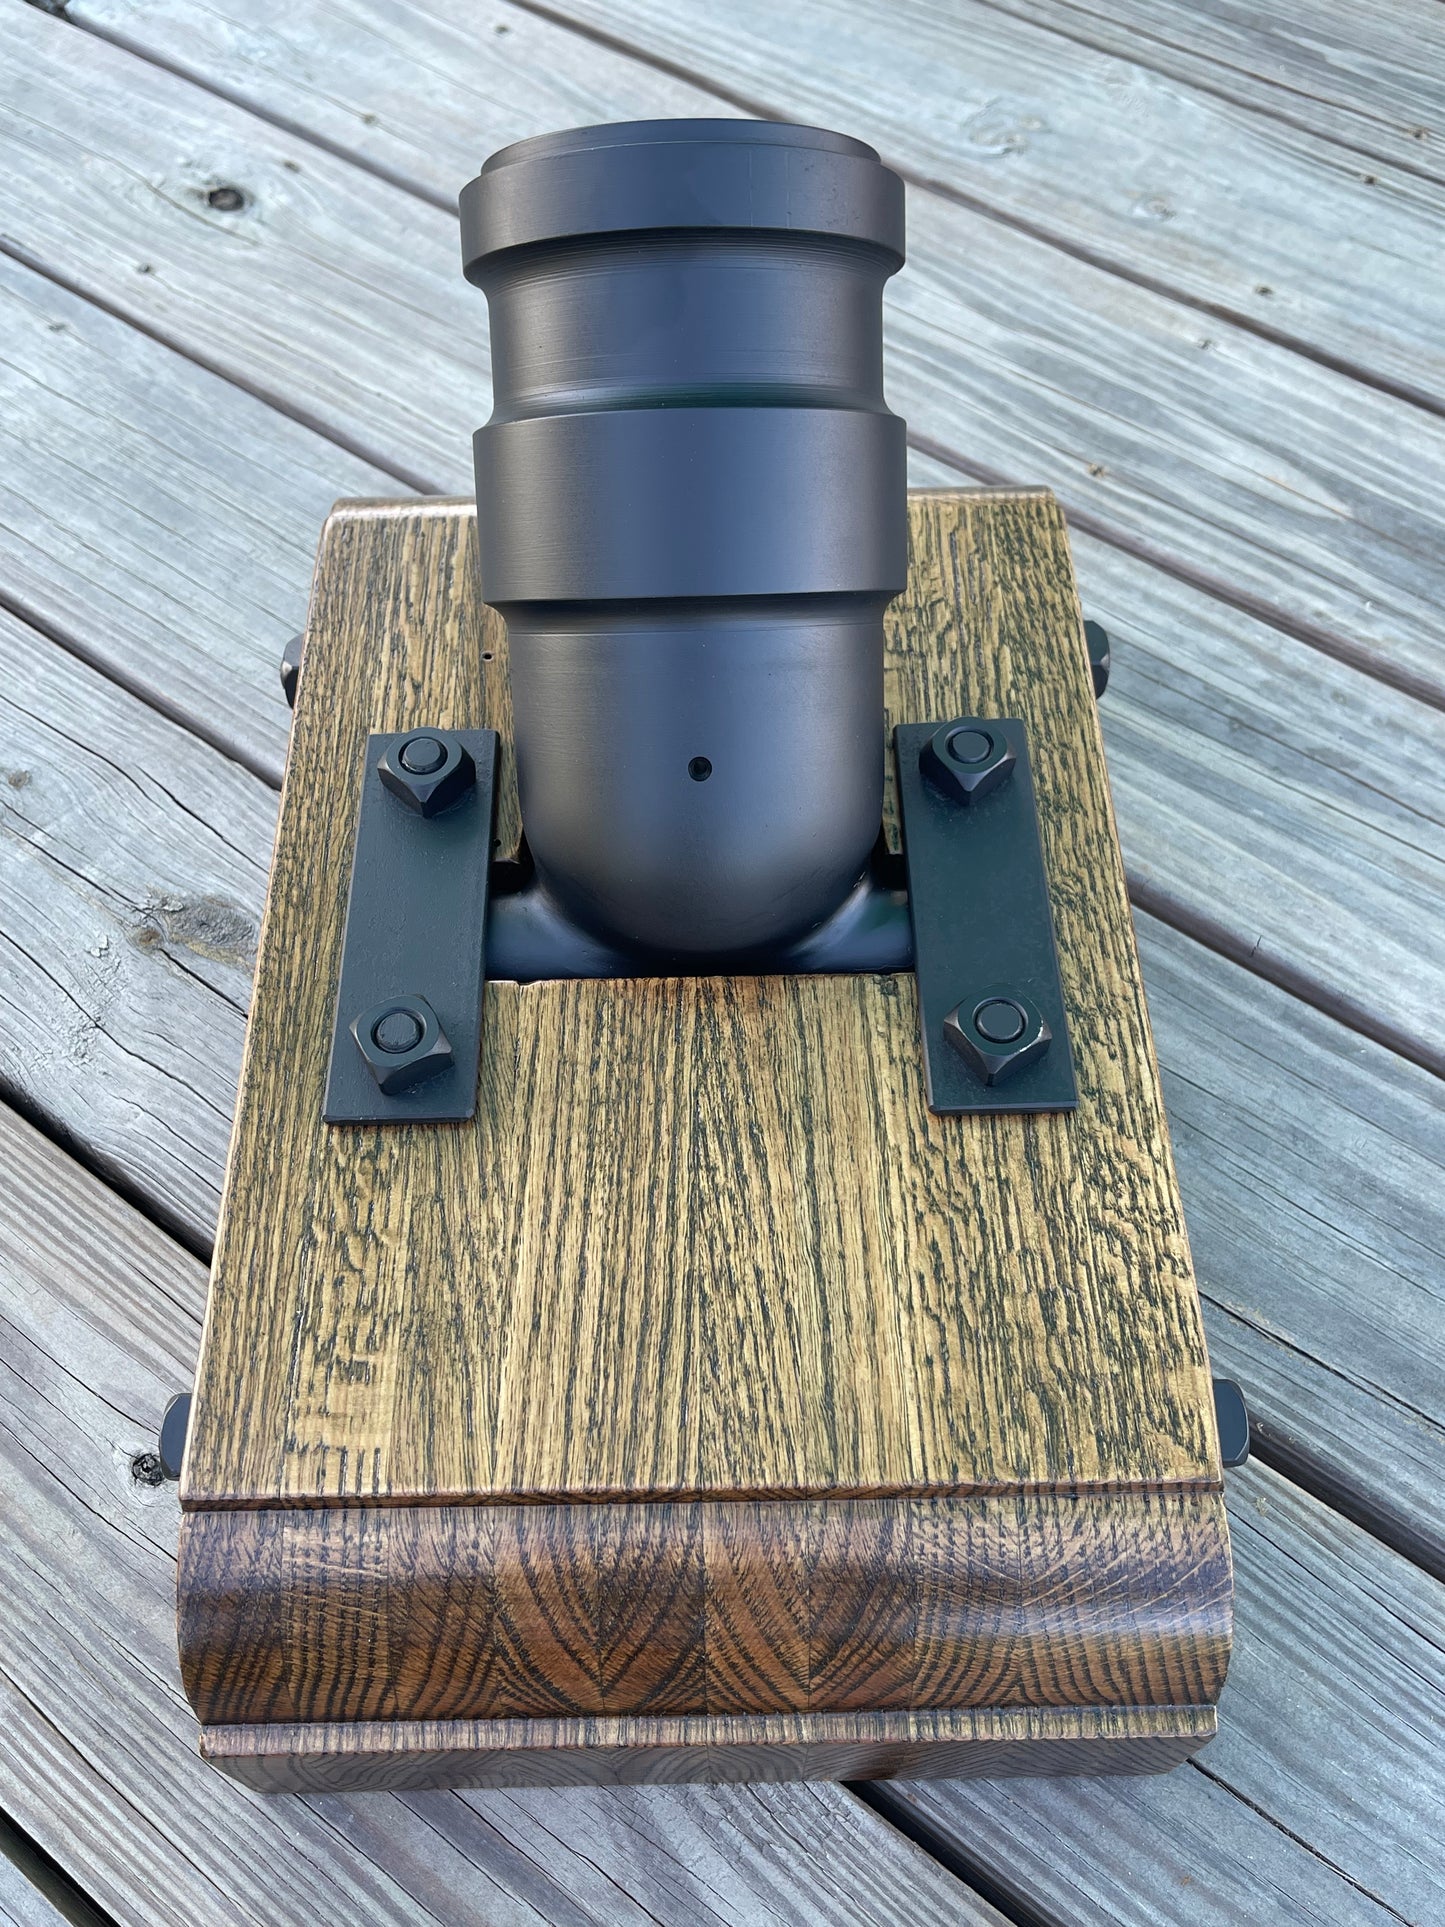 Coehorn Mortar Complete With Dark Oak Base / Soda Can Size Bore